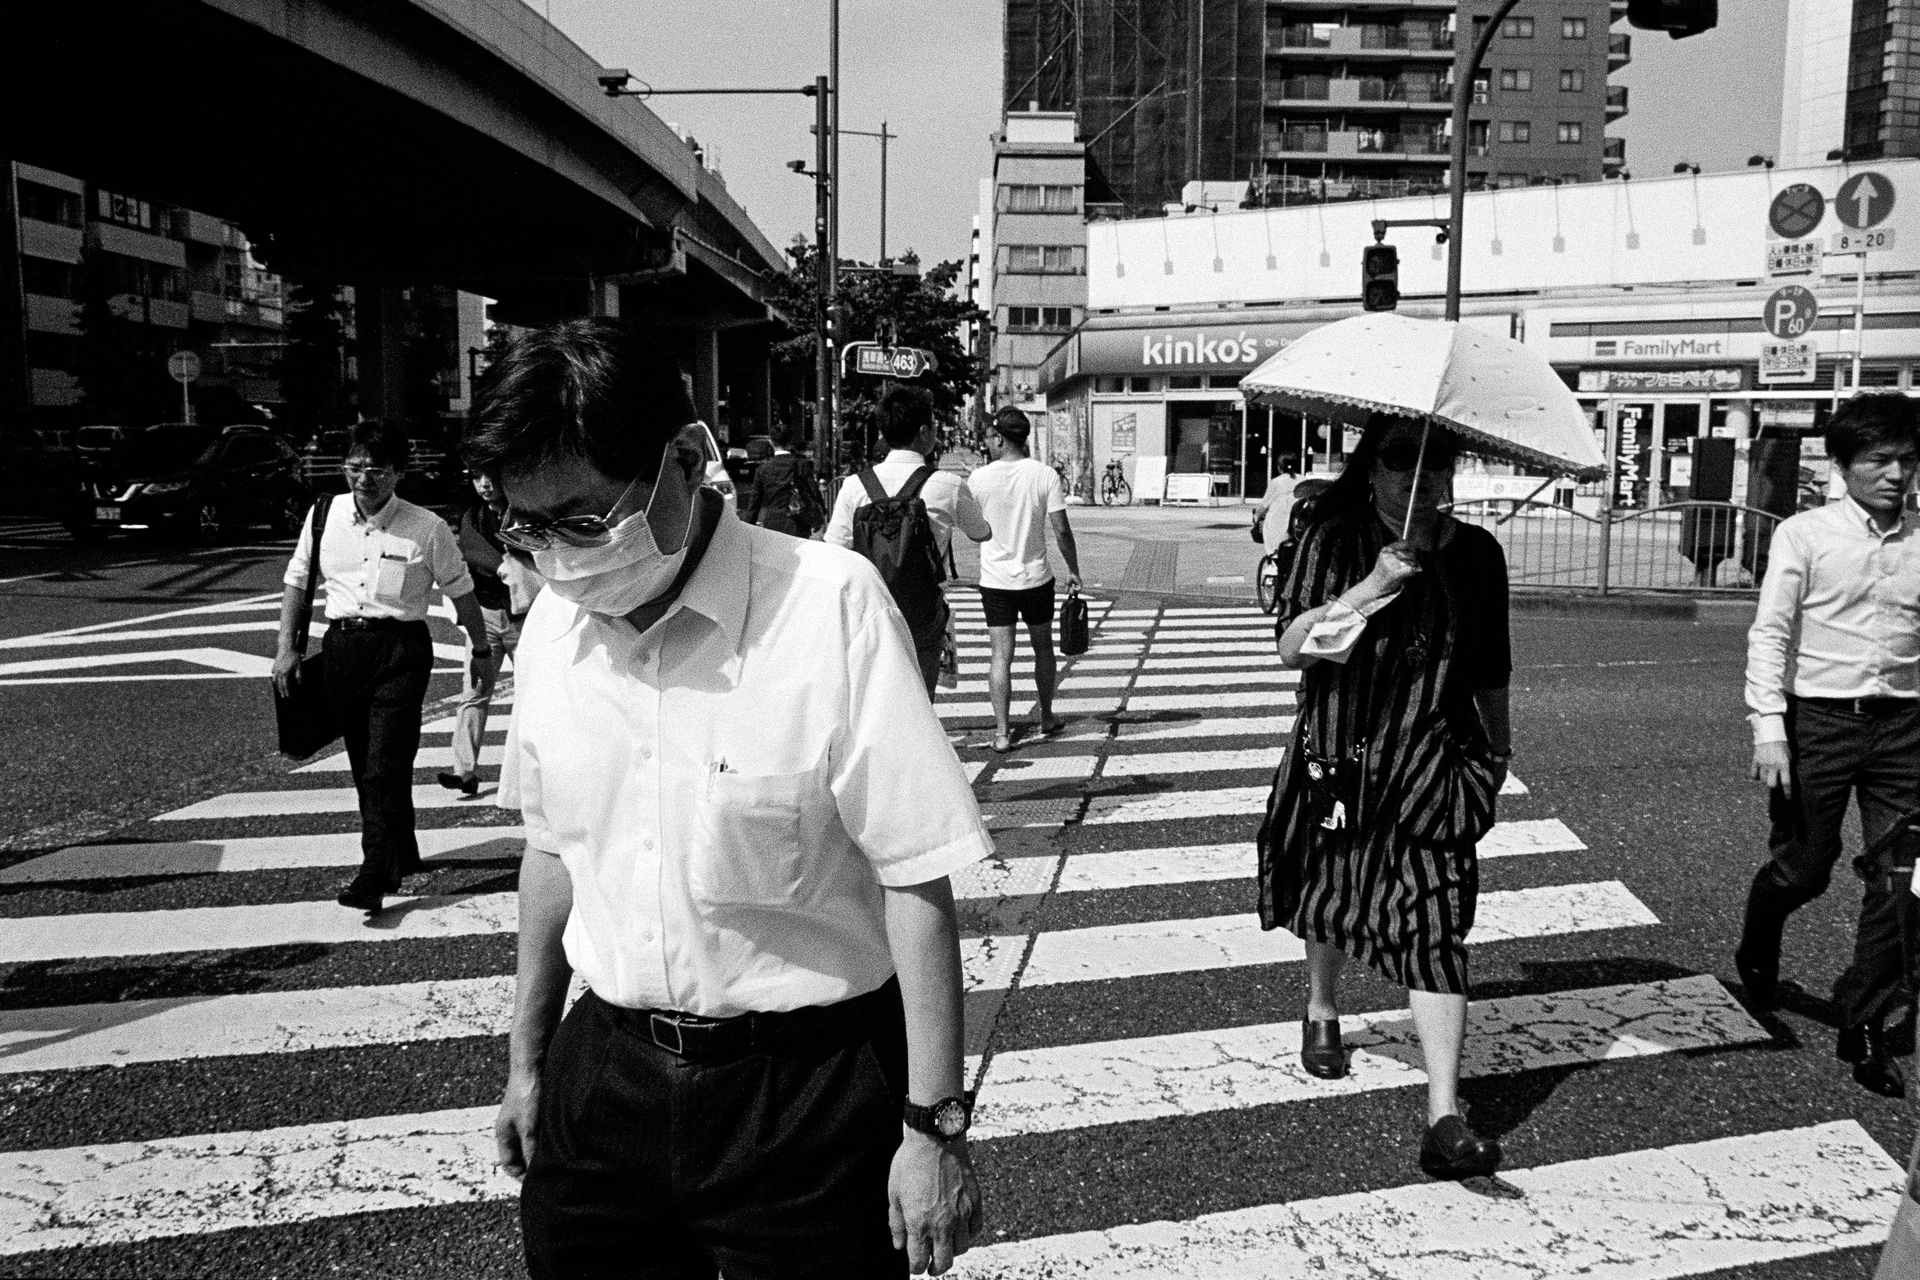 black and white photo of people crossing street, man in foreground wearing a medical mask